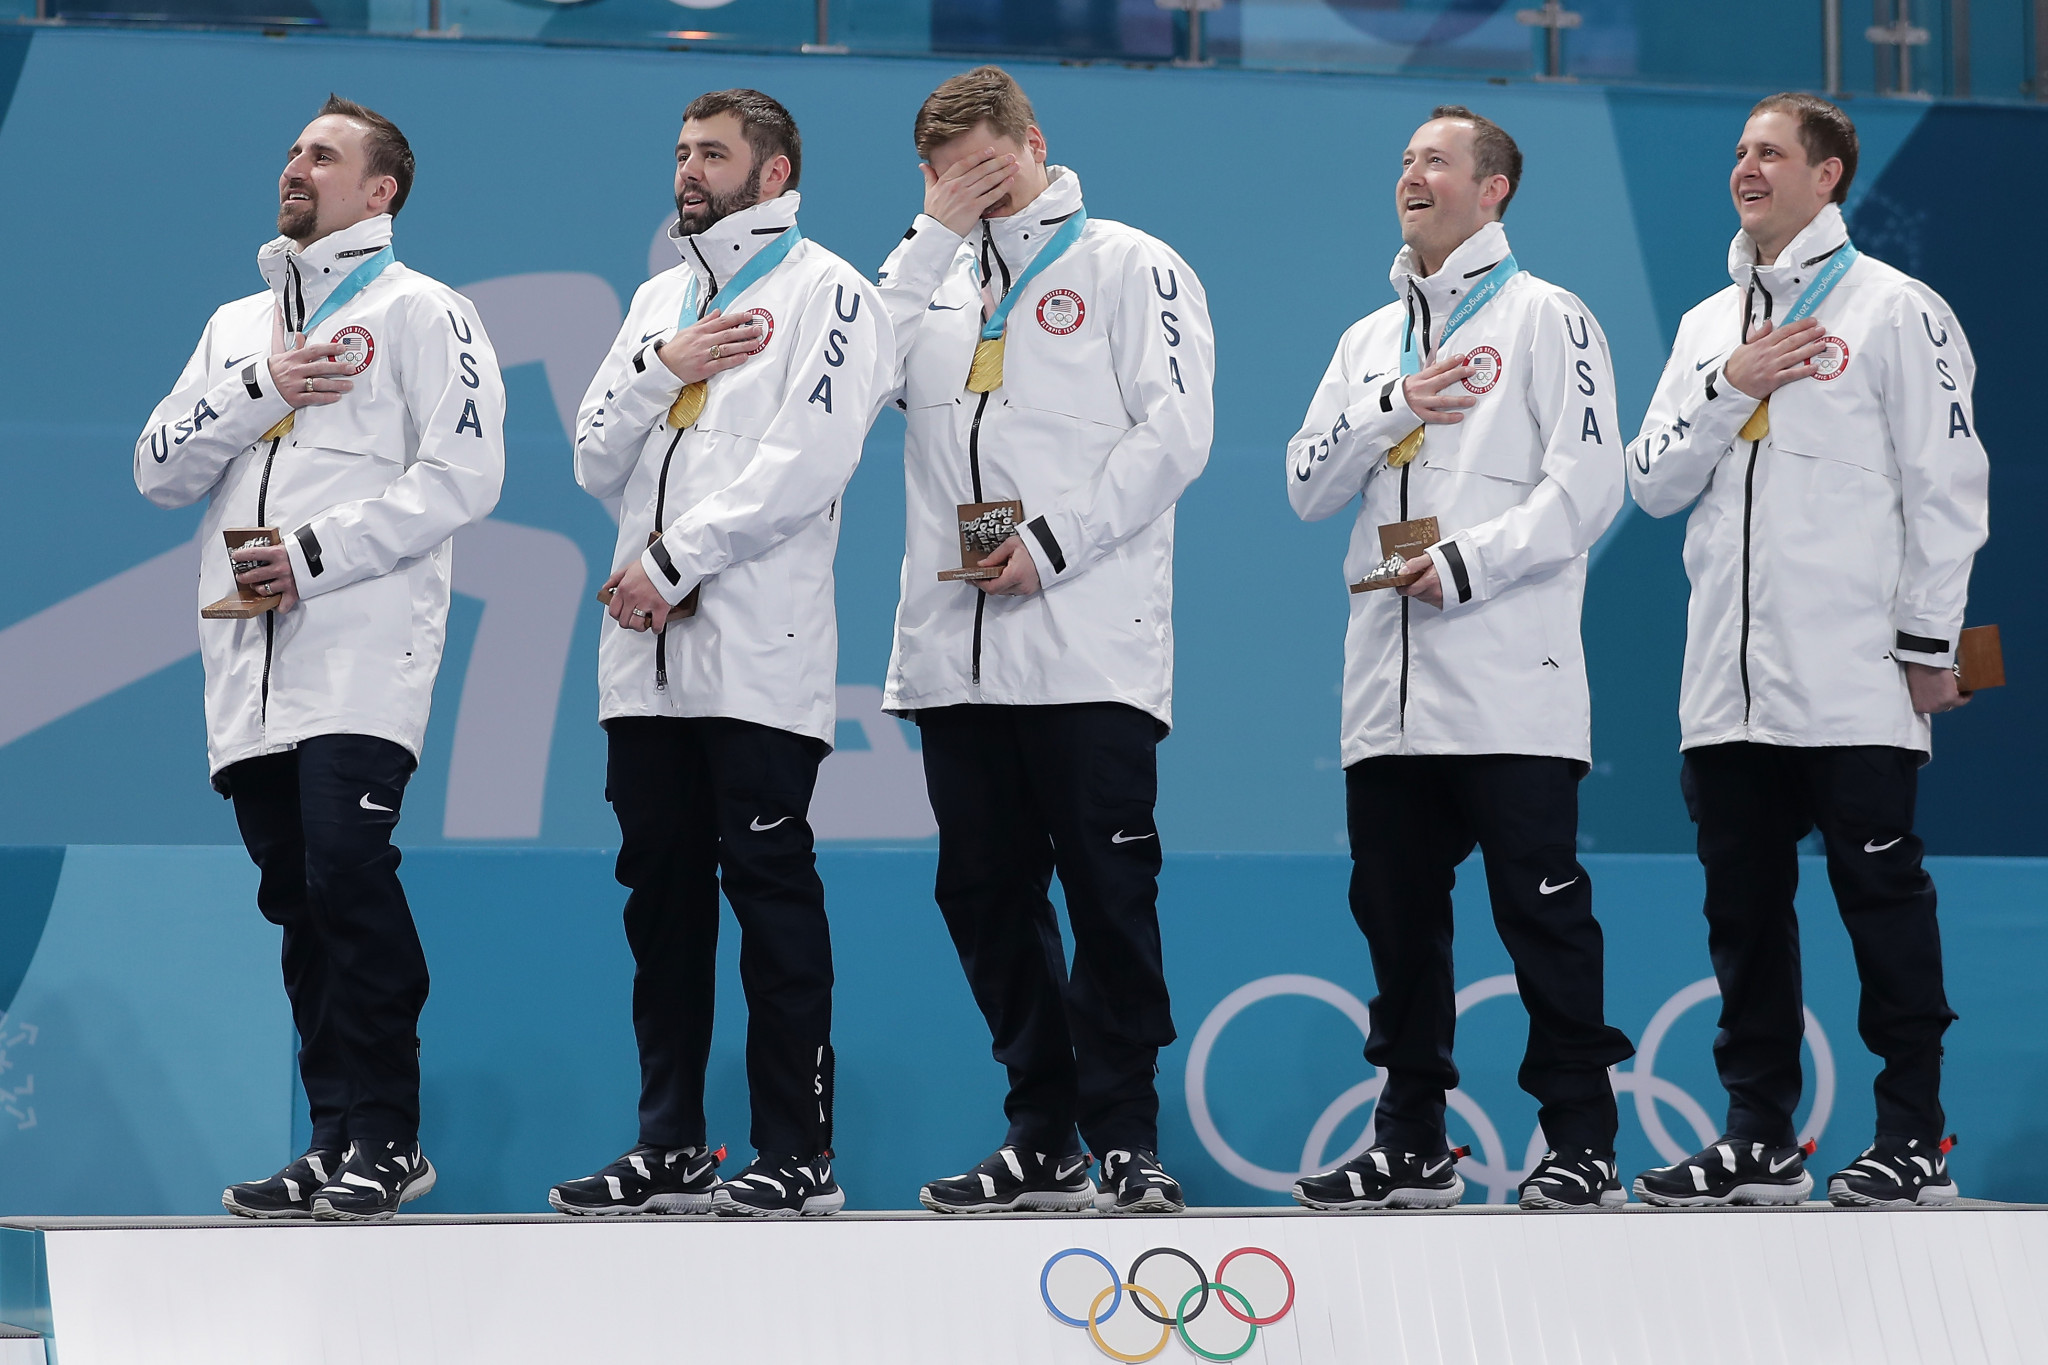 The United States beat Sweden 10-7 to claim their first-ever Olympic men’s curling title on day 15 of Pyeongchang 2018 ©Getty Images